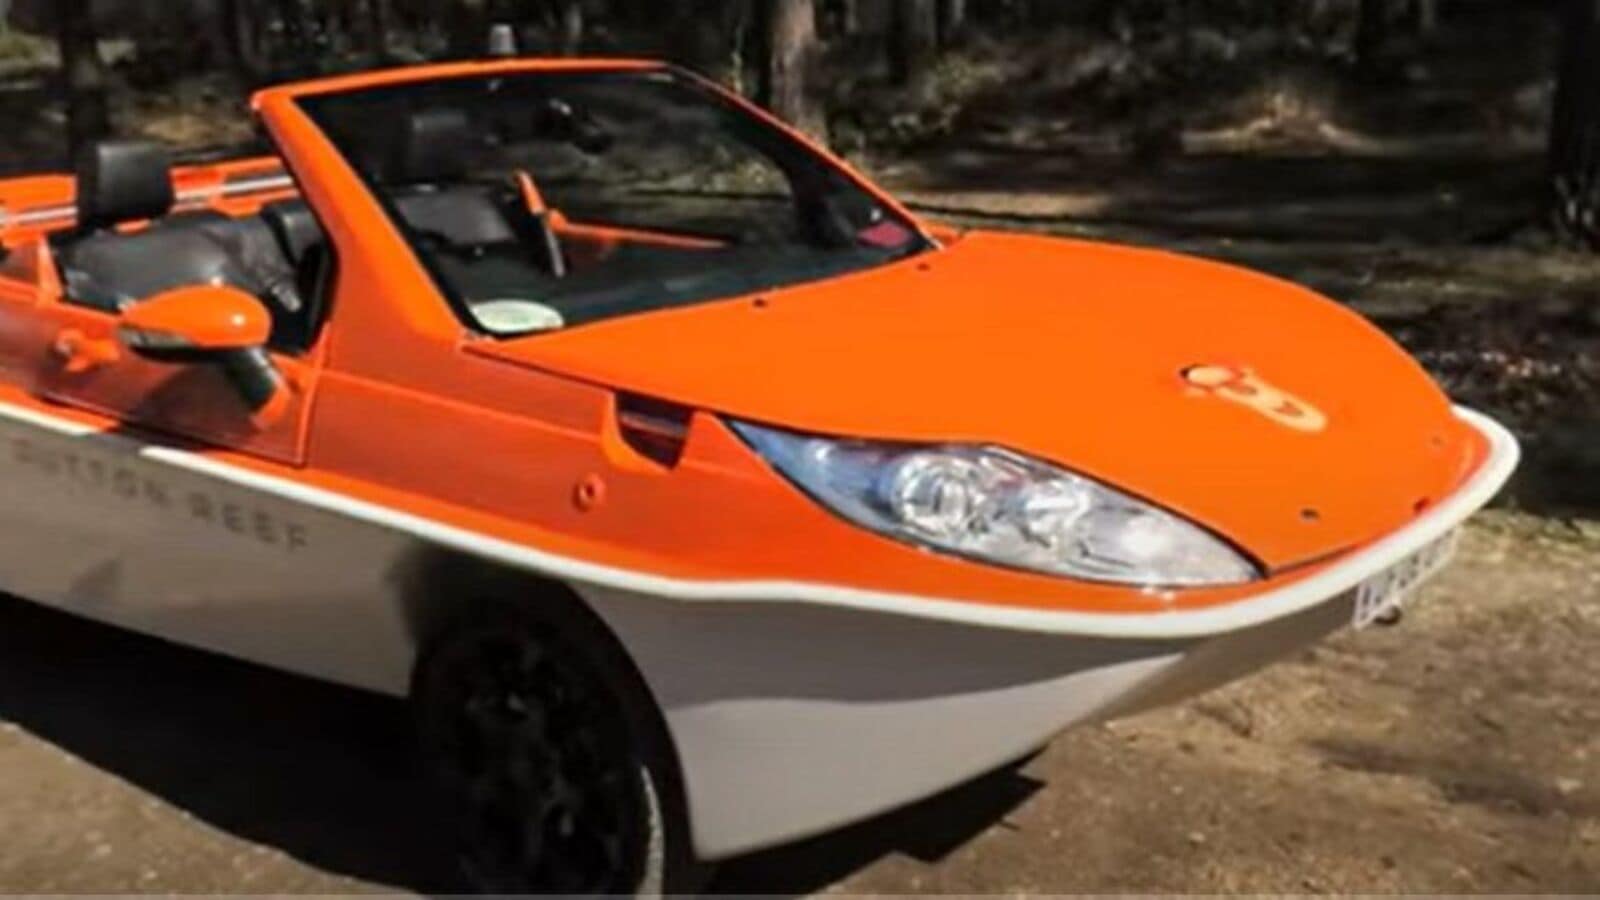 Watch: This Ford Fiesta is a automobile in addition to a ship